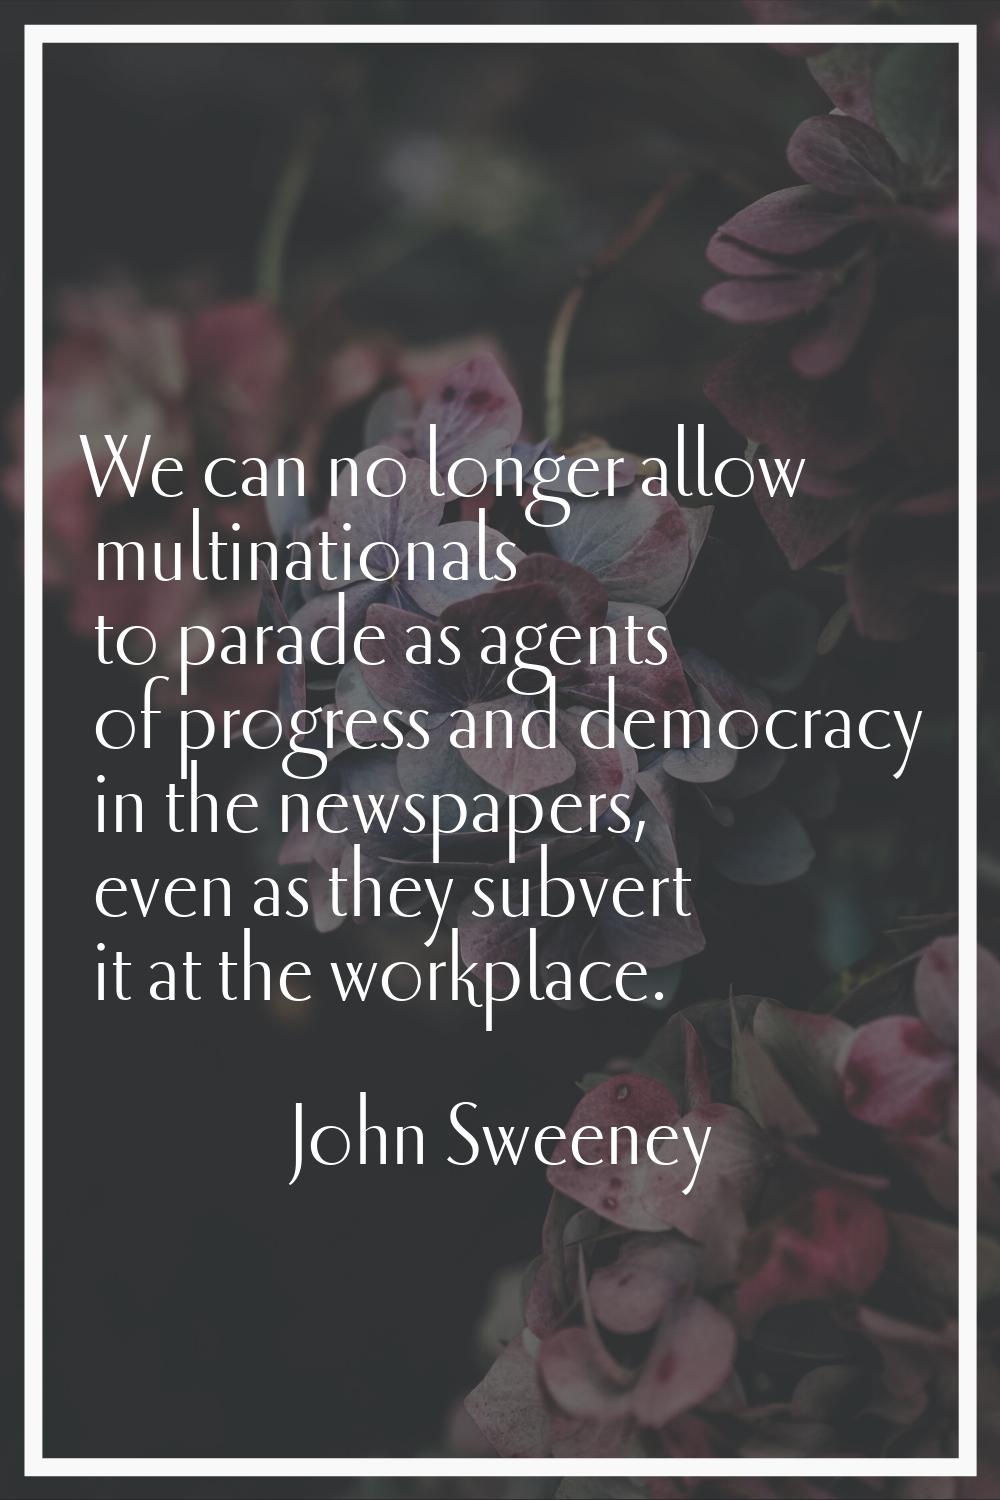 We can no longer allow multinationals to parade as agents of progress and democracy in the newspape